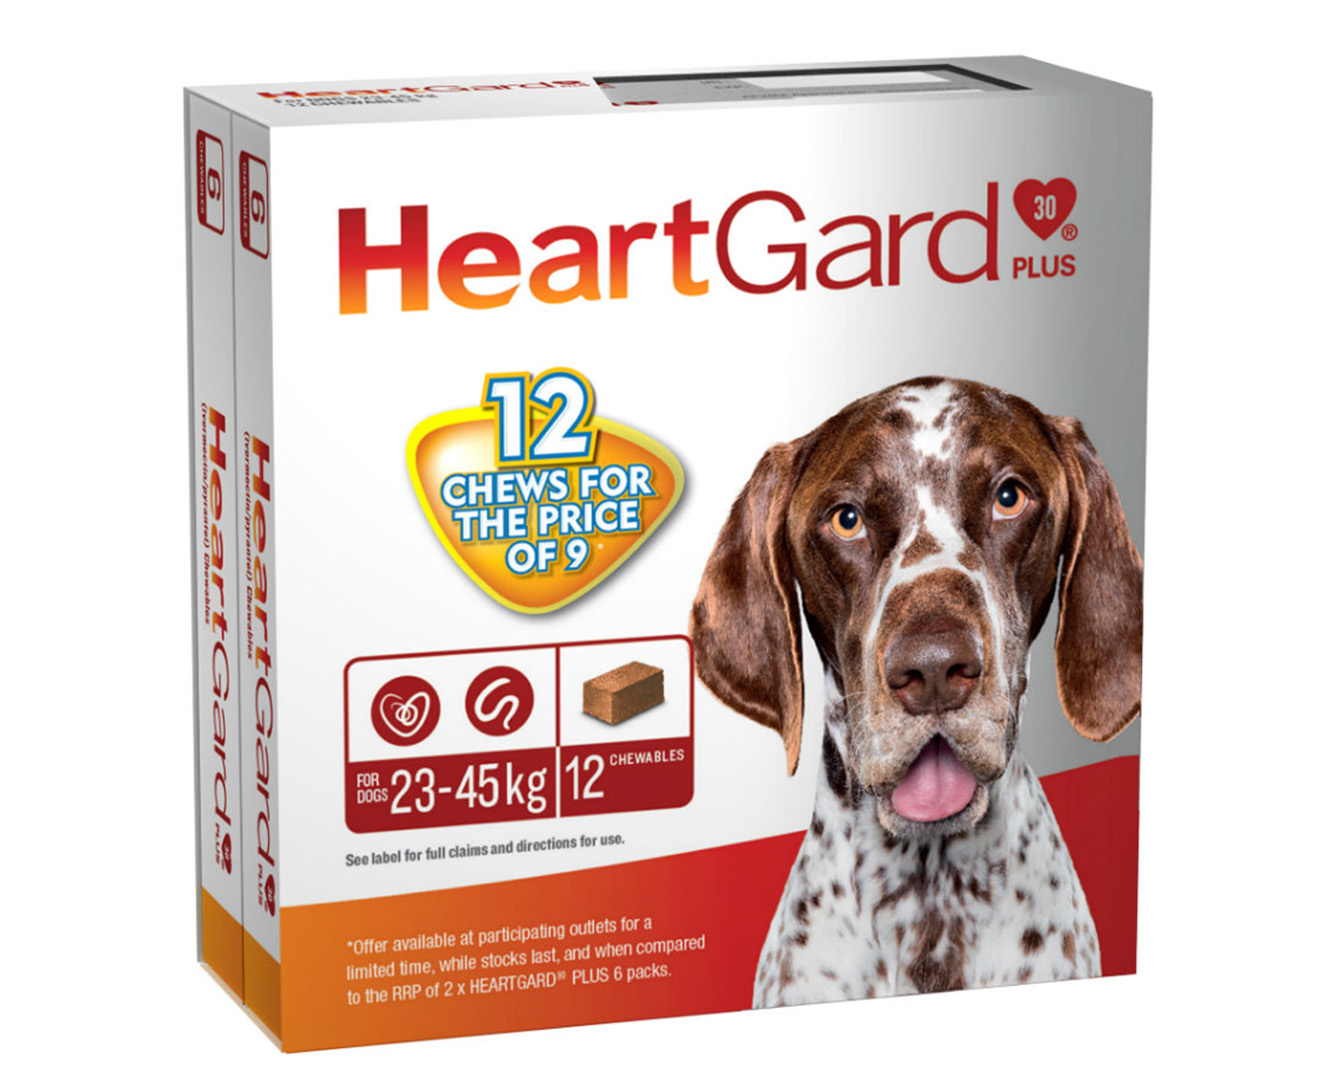 heartgard-plus-worm-protection-chews-for-large-dogs-23-45kg-12pk-ebay